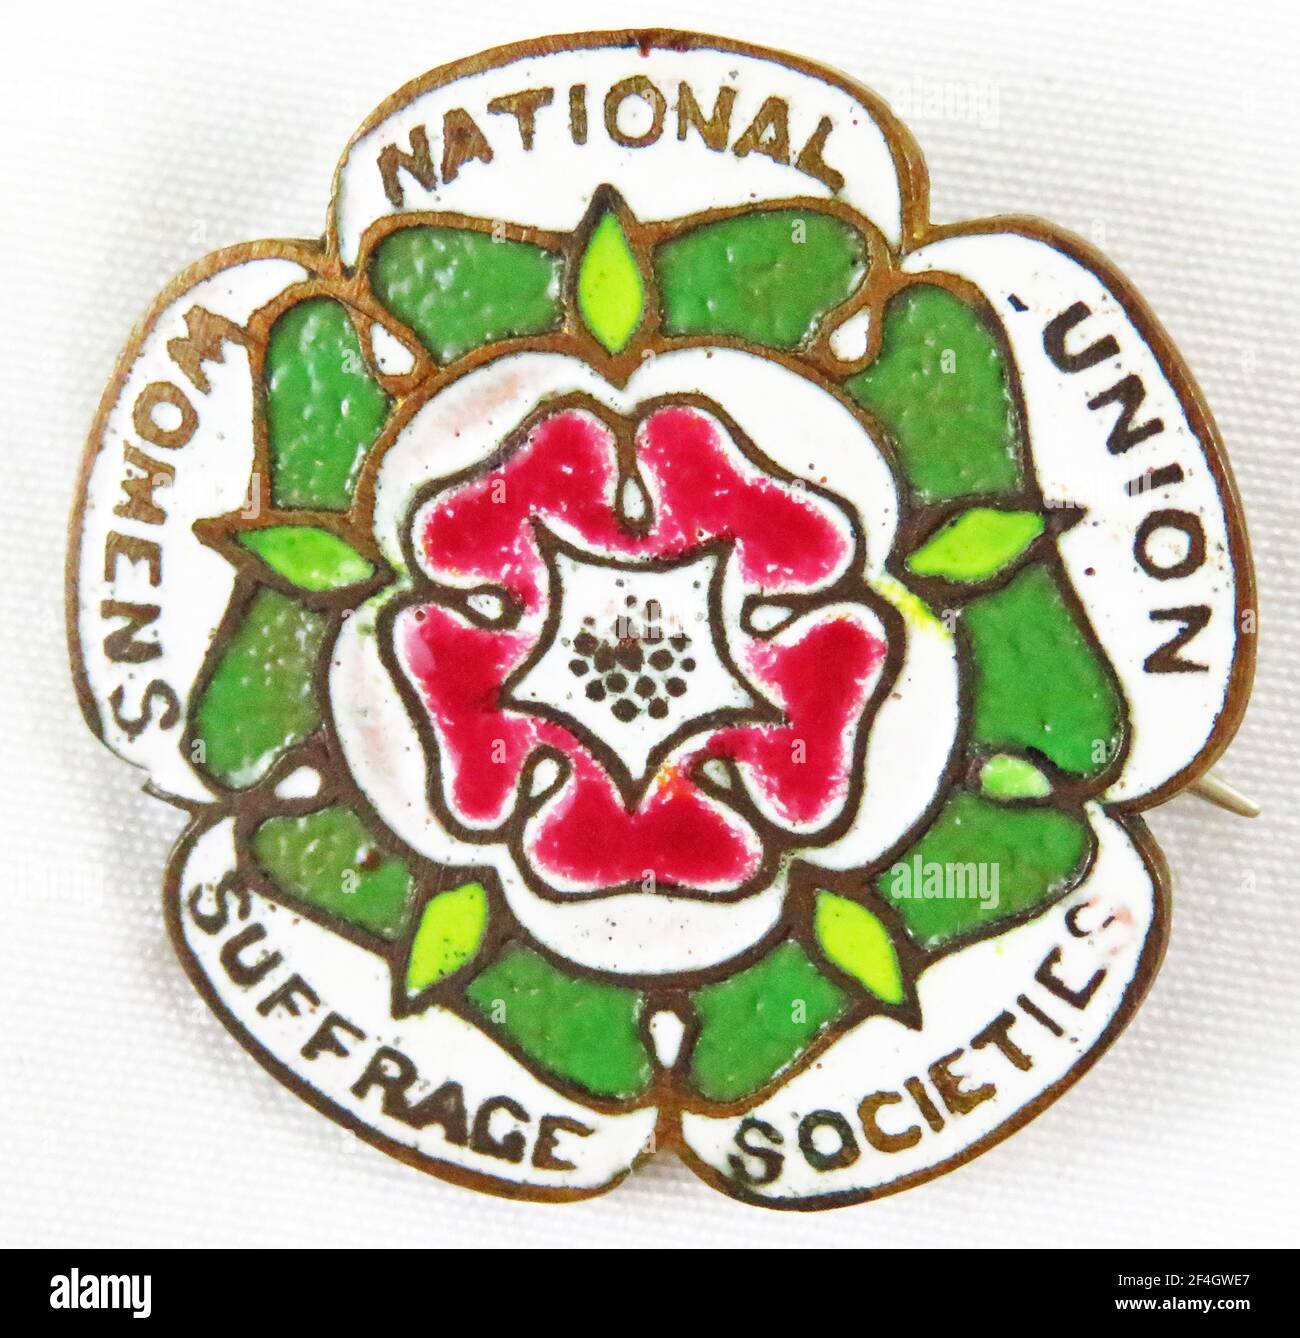 Red, green, and white, multi-lobed enamel pin or badge, with a stylized five-petalled red rose and the text 'National Union Women Suffrage Societies, ' manufactured by the National Union of Women Suffrage Societies (NUWSS), for the British market, 1905. Photography by Emilia van Beugen. () Stock Photo